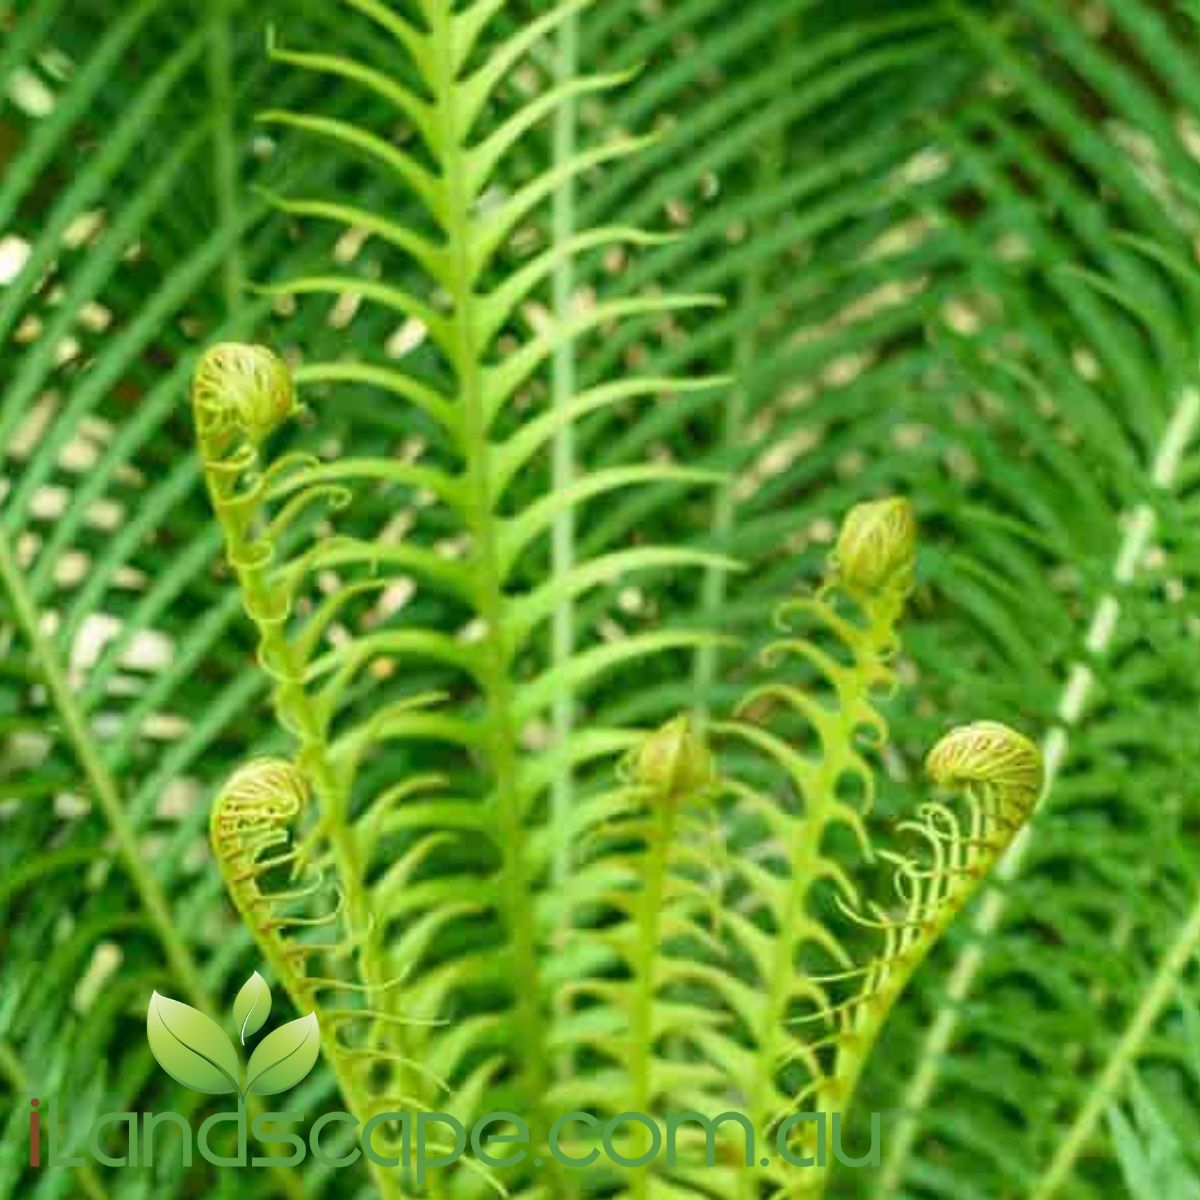 Blechnum Silver Lady is also known as a dwarf tree fern and has lush beautiful green foliage  emerging from a short black trunk 